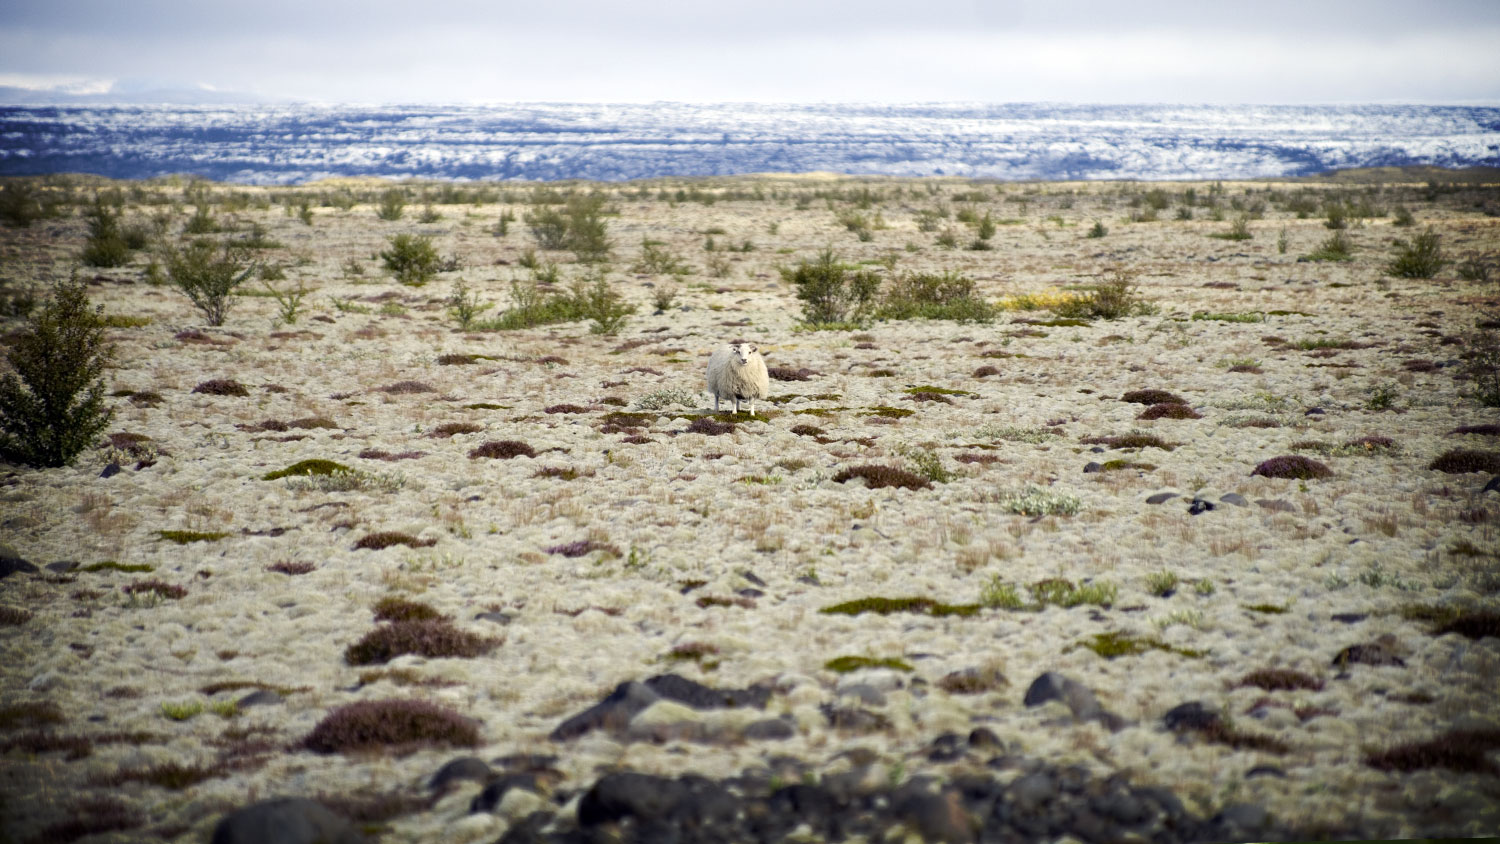 A lone sheep on the sandar in South East Iceland